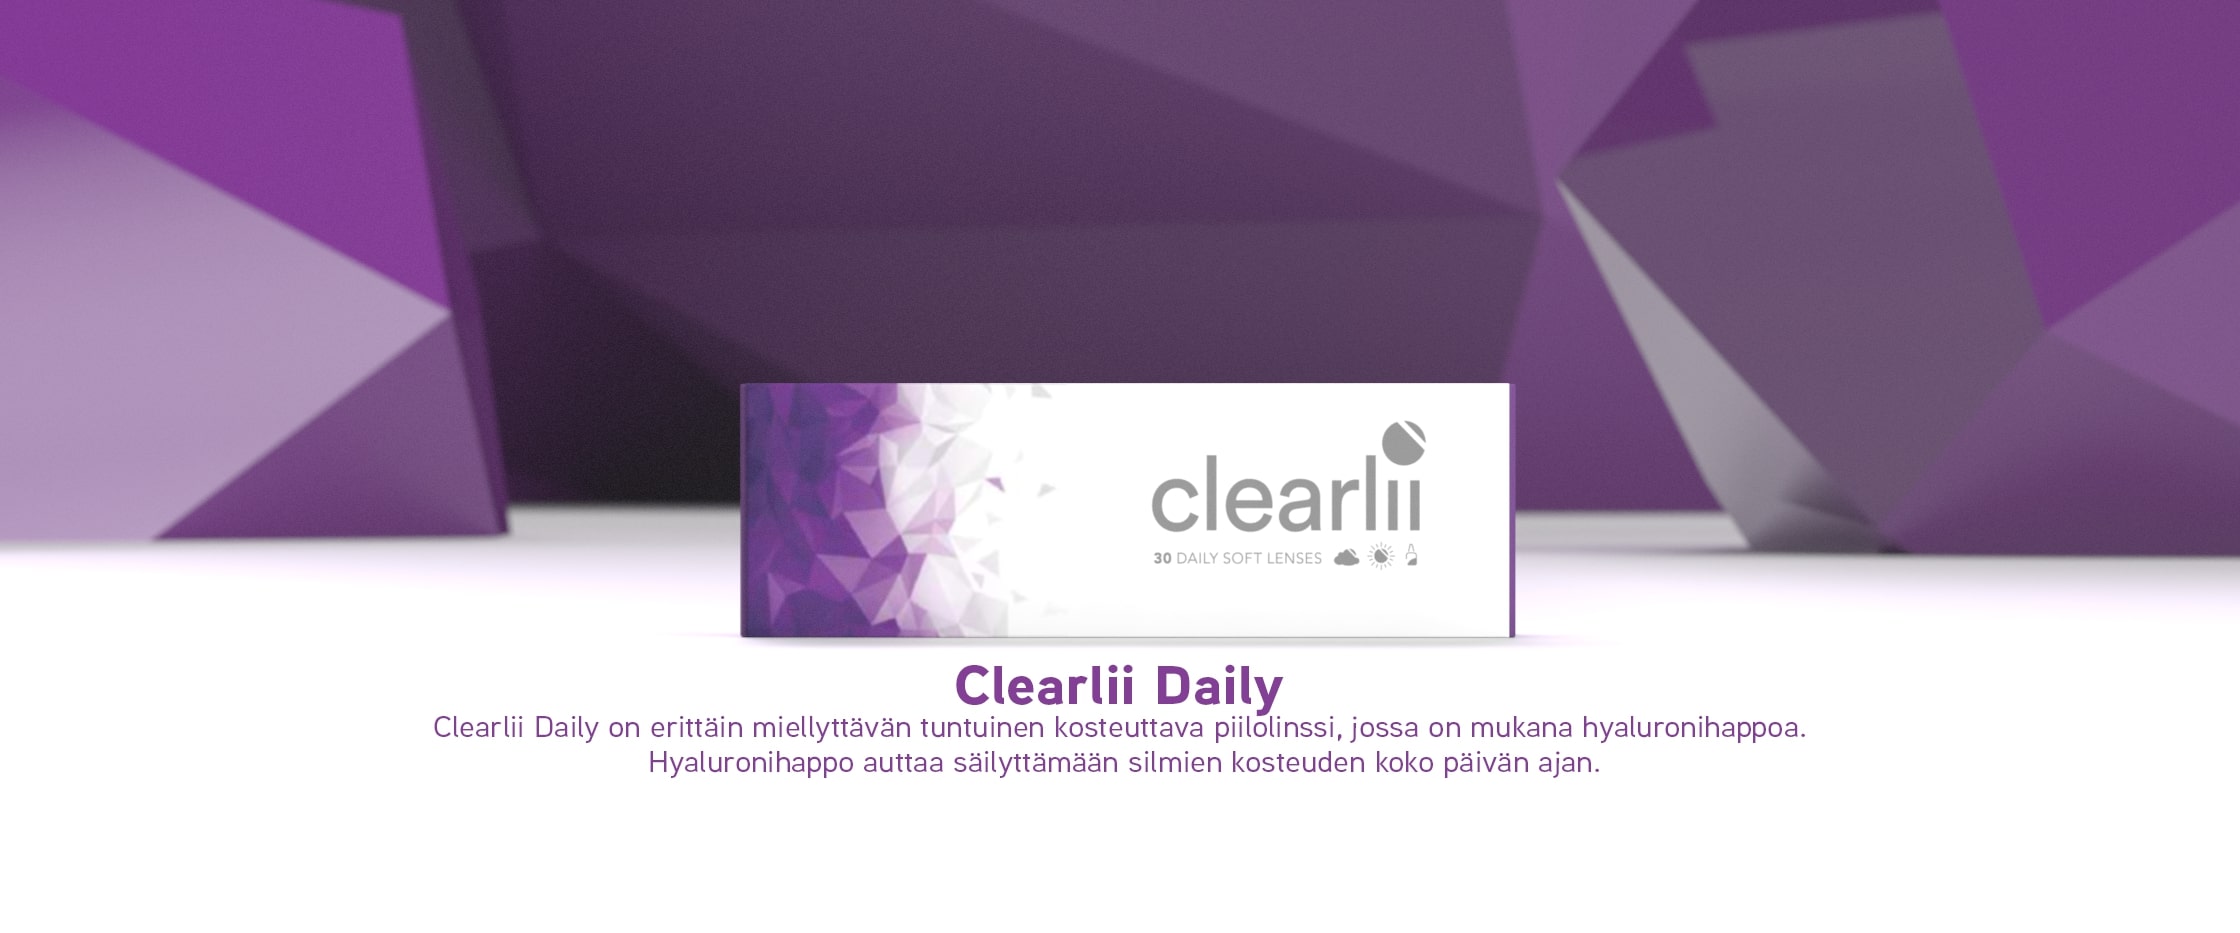 Clearlii